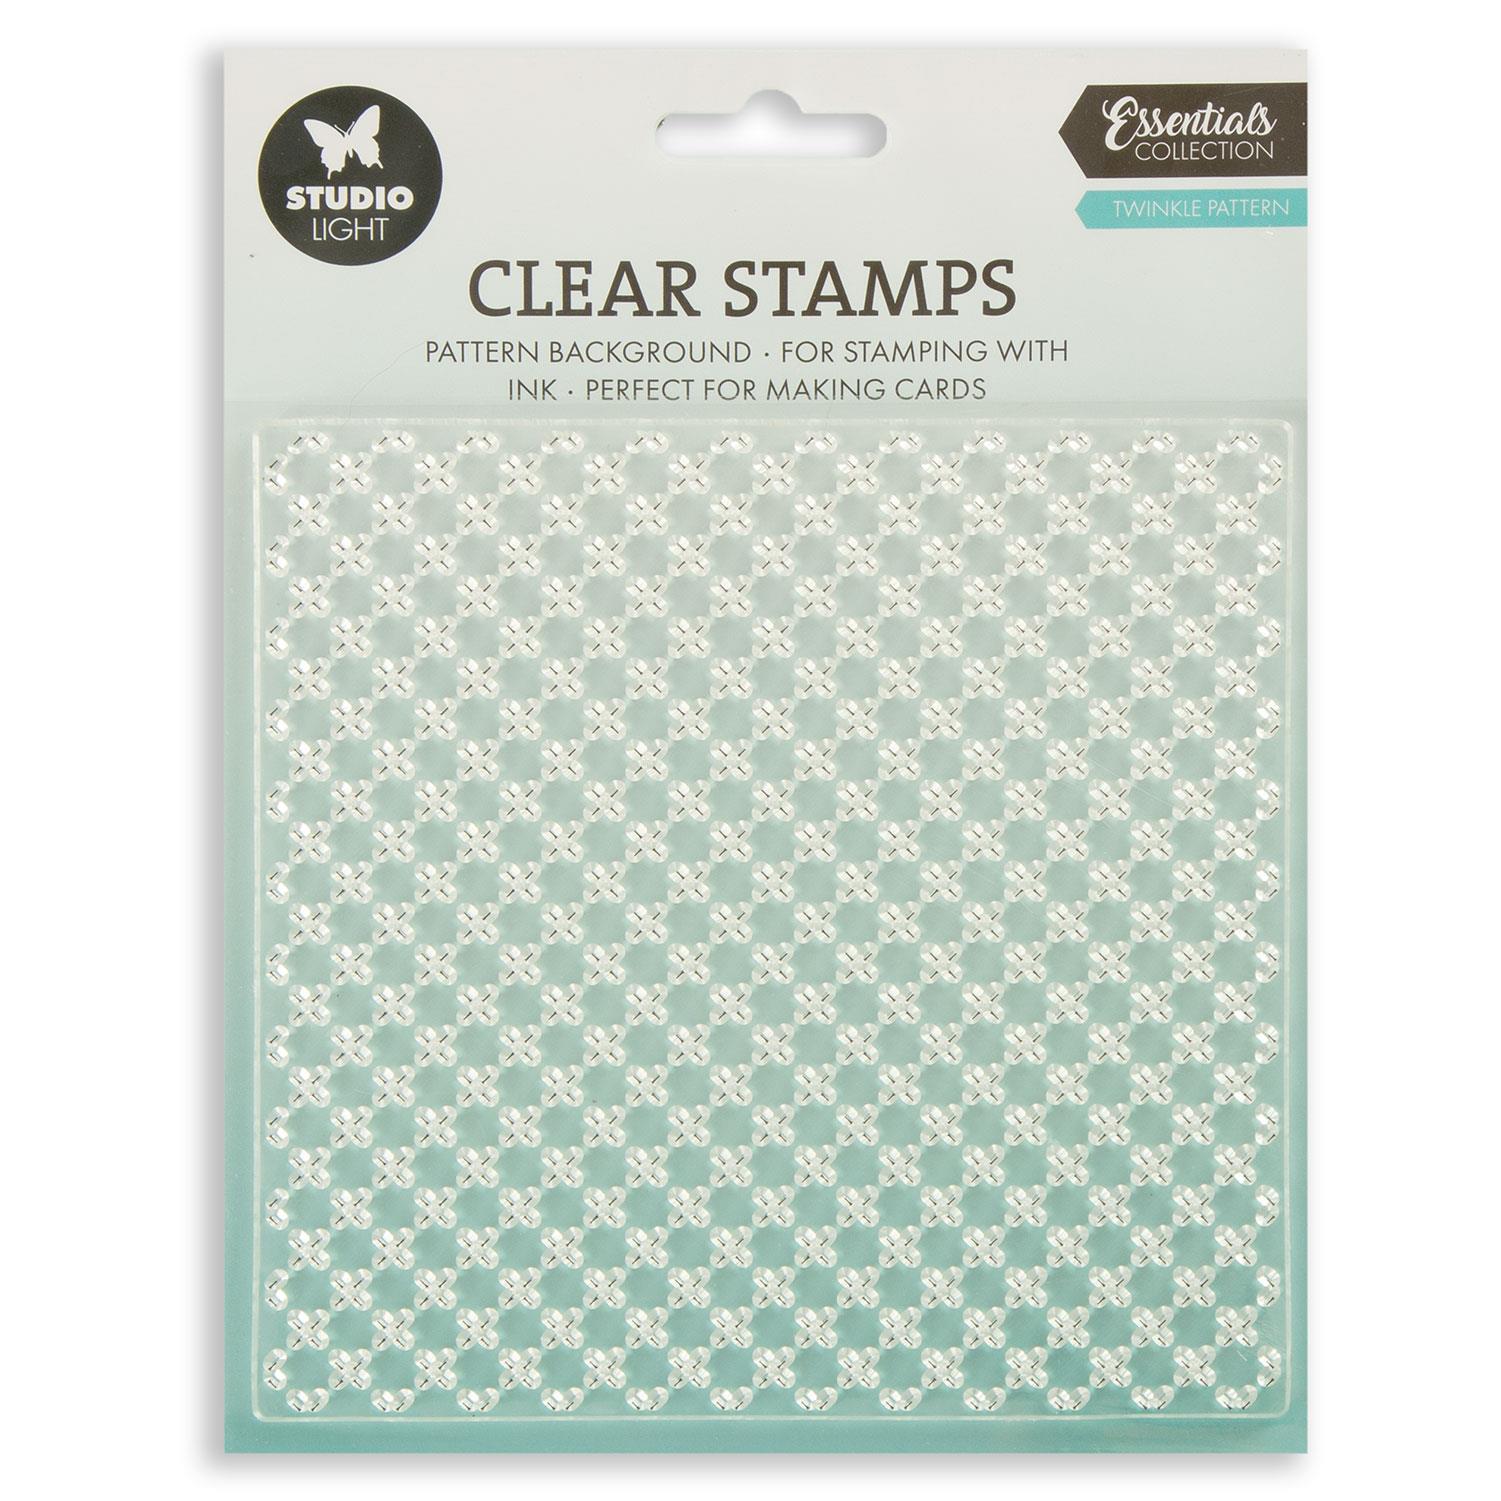 Studio Light Essentials Background Stamp Pick N Mix - Choose any 2 - Twinkle 